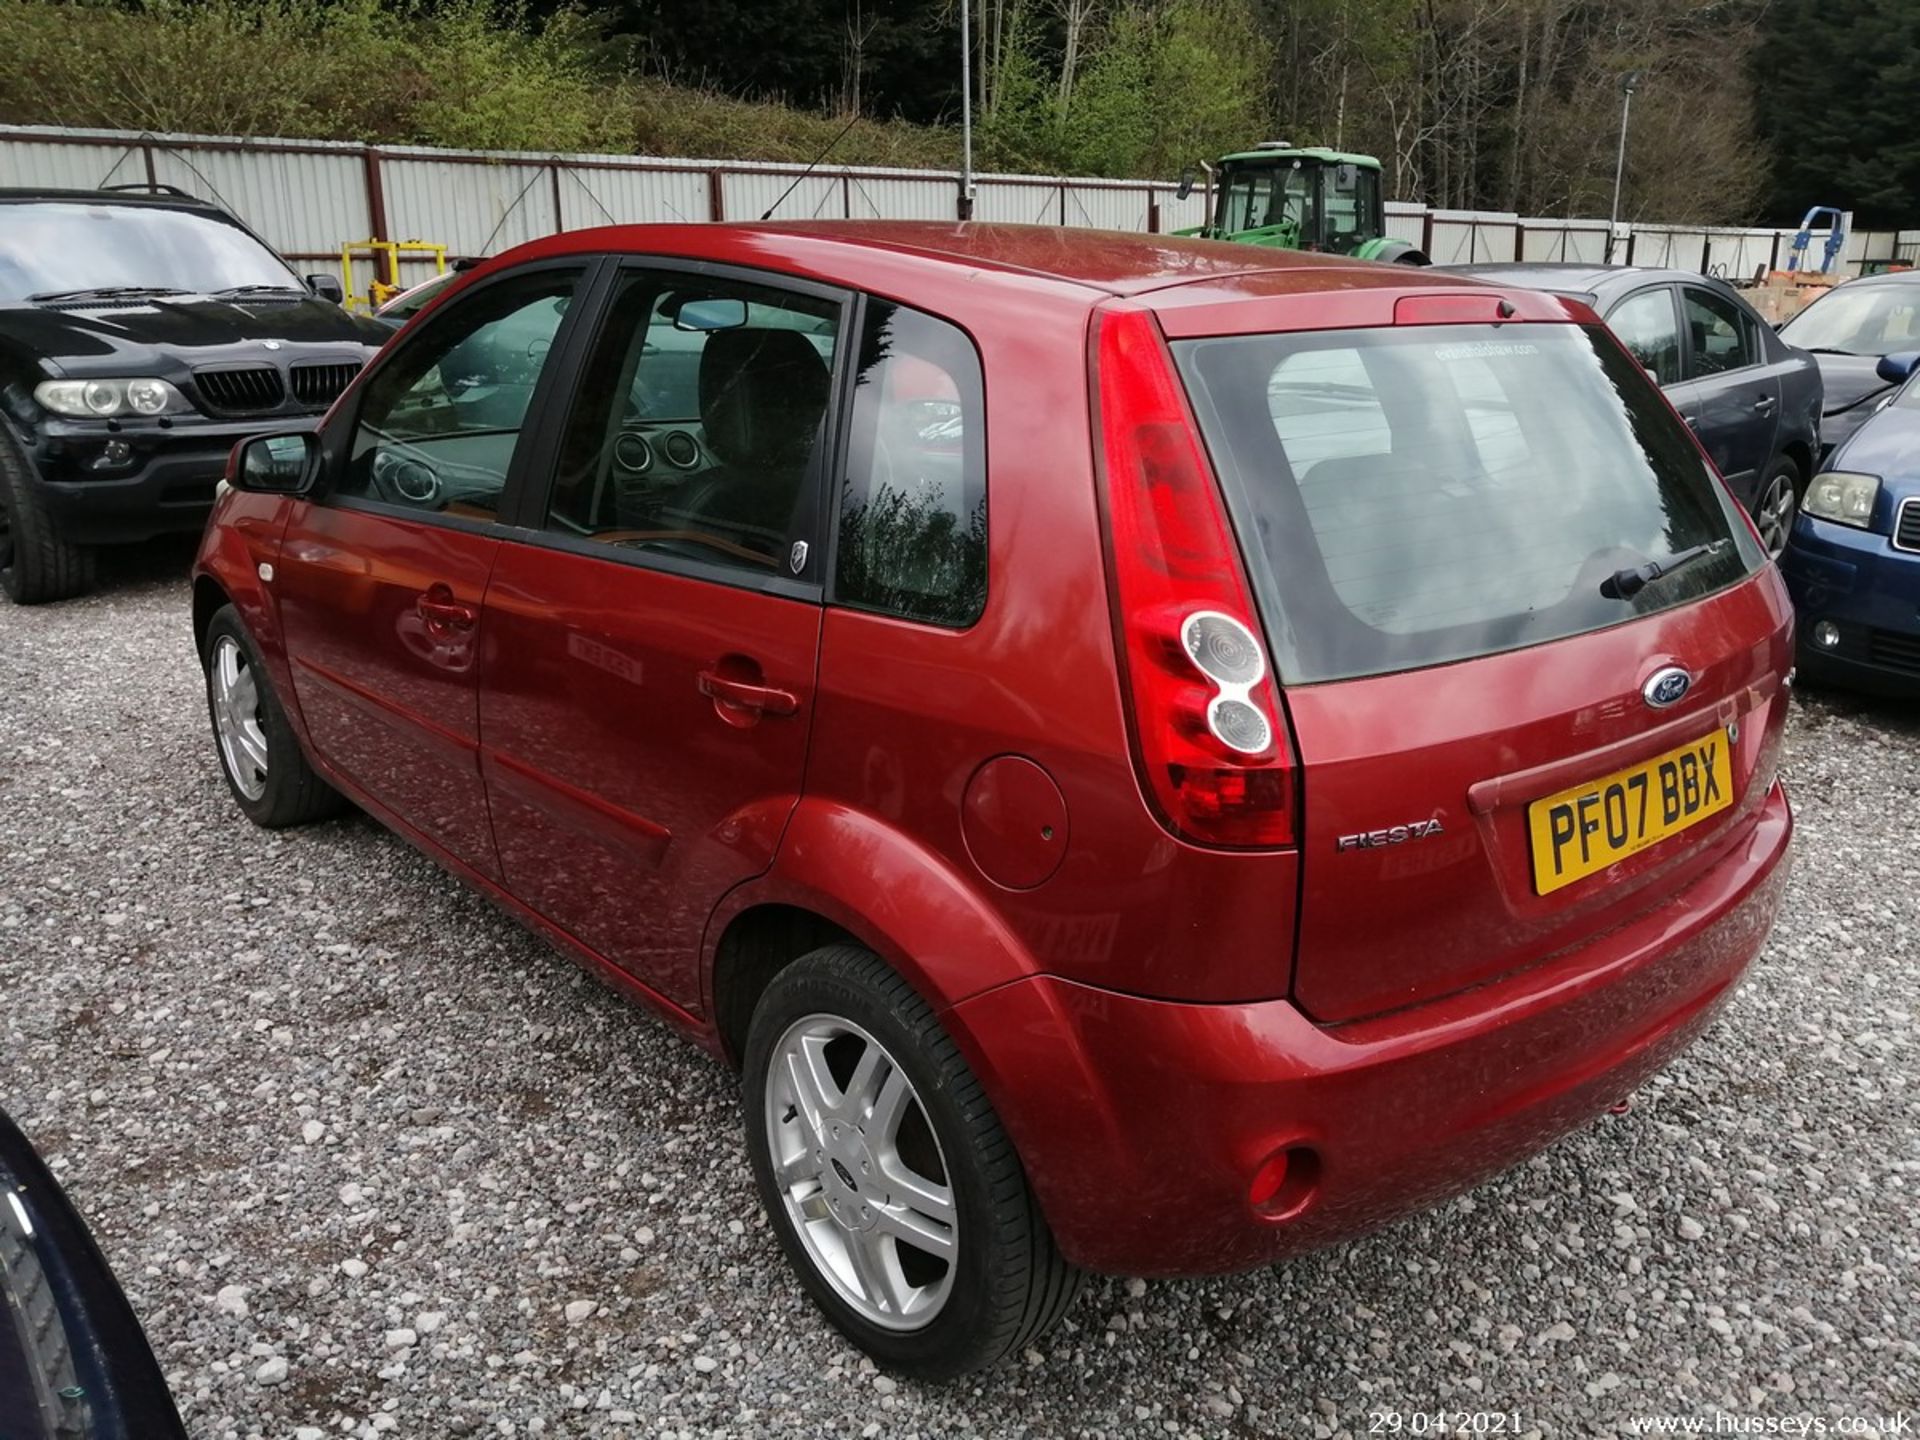 07/07 FORD FIESTA GHIA TDCI - 1399cc 5dr Hatchback (Red, 111k) - Image 4 of 11